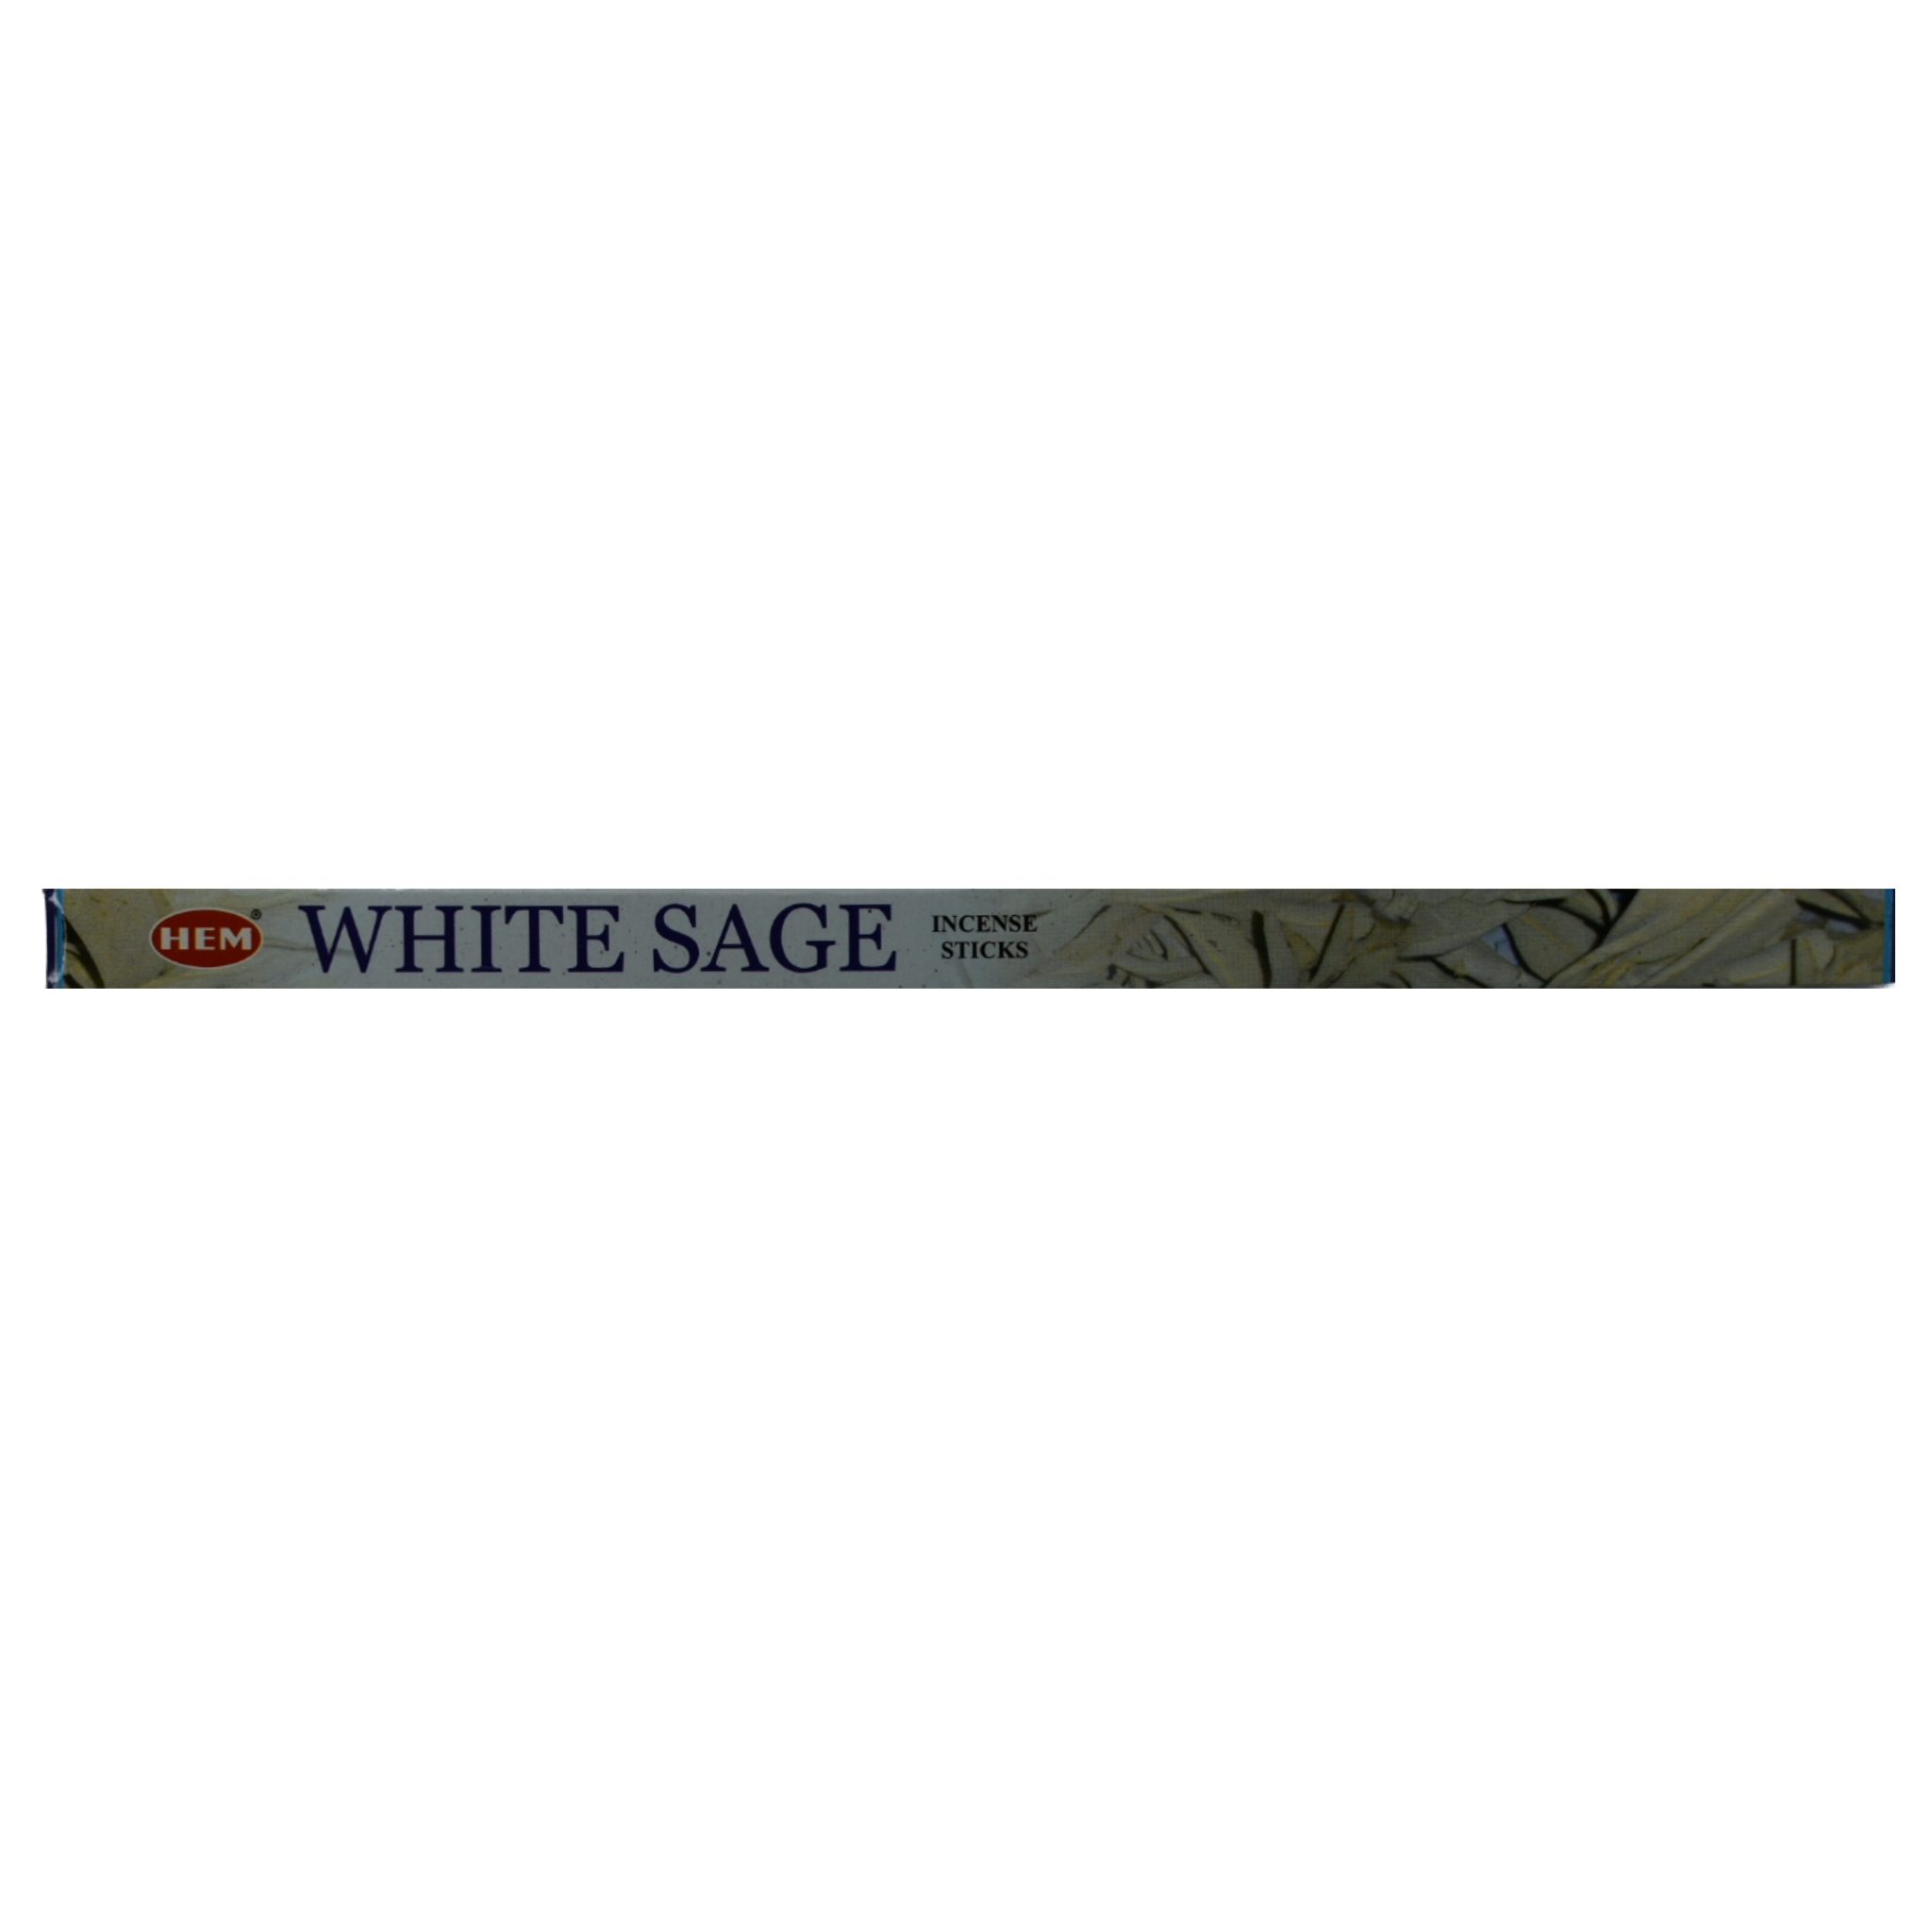 White Sage Incense Sticks. Gray box that says HEM White Sage Incense Sticks on the left half. The right half of the box has a picture of white sage leaves.